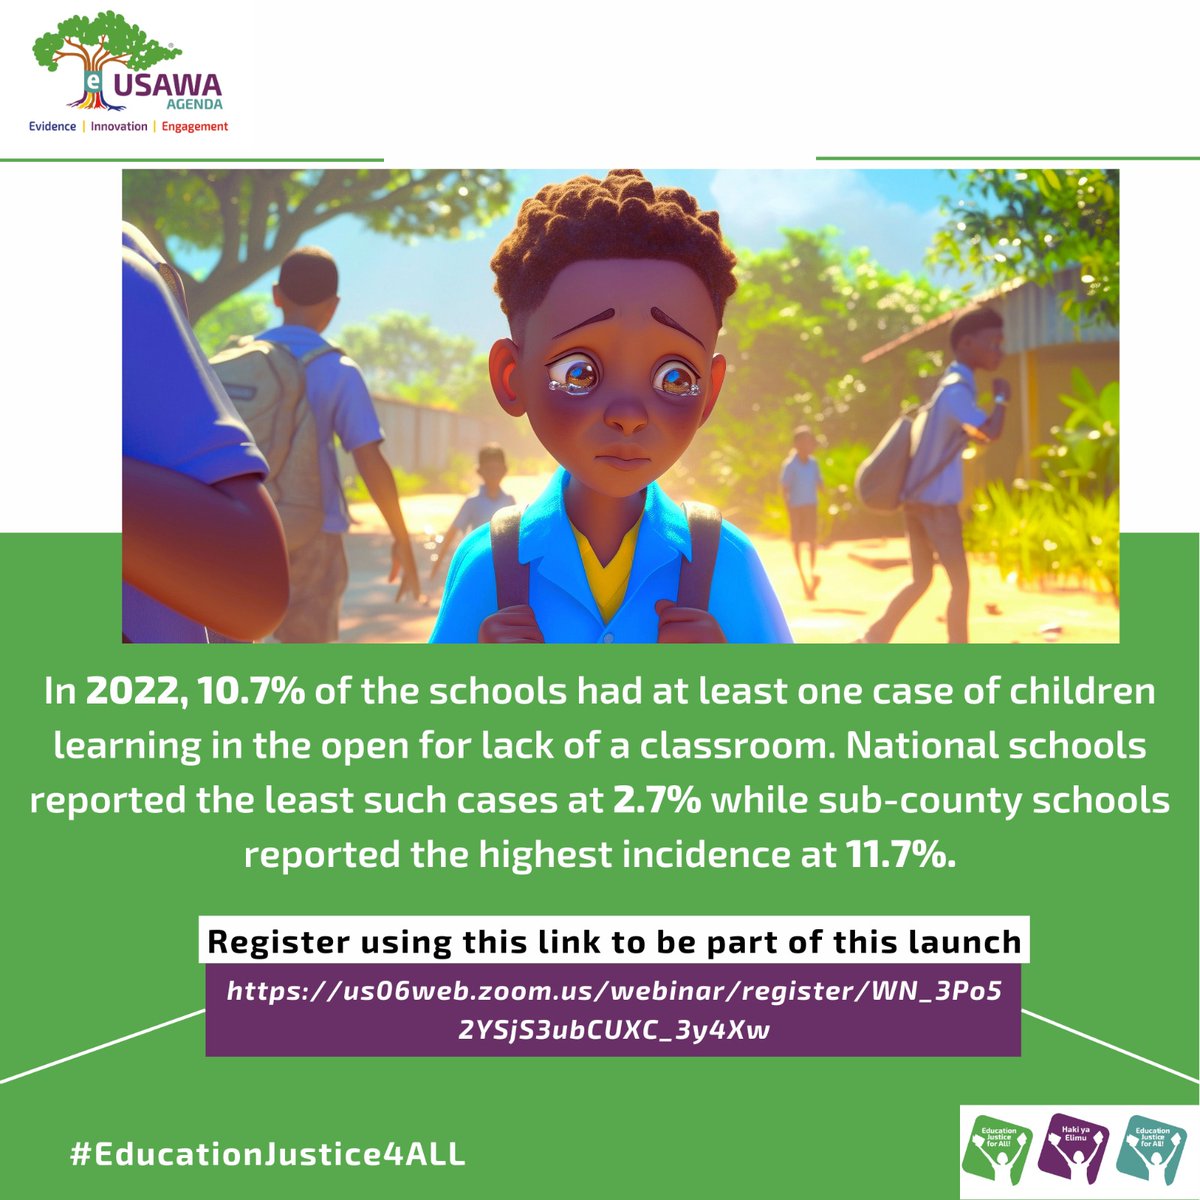 Usawa Agenda's Secondary School Survey launch marks a critical juncture in the quest for educational equity, sparking conversations that will shape the future of learning in Kenya. #EducationJustice4ALL